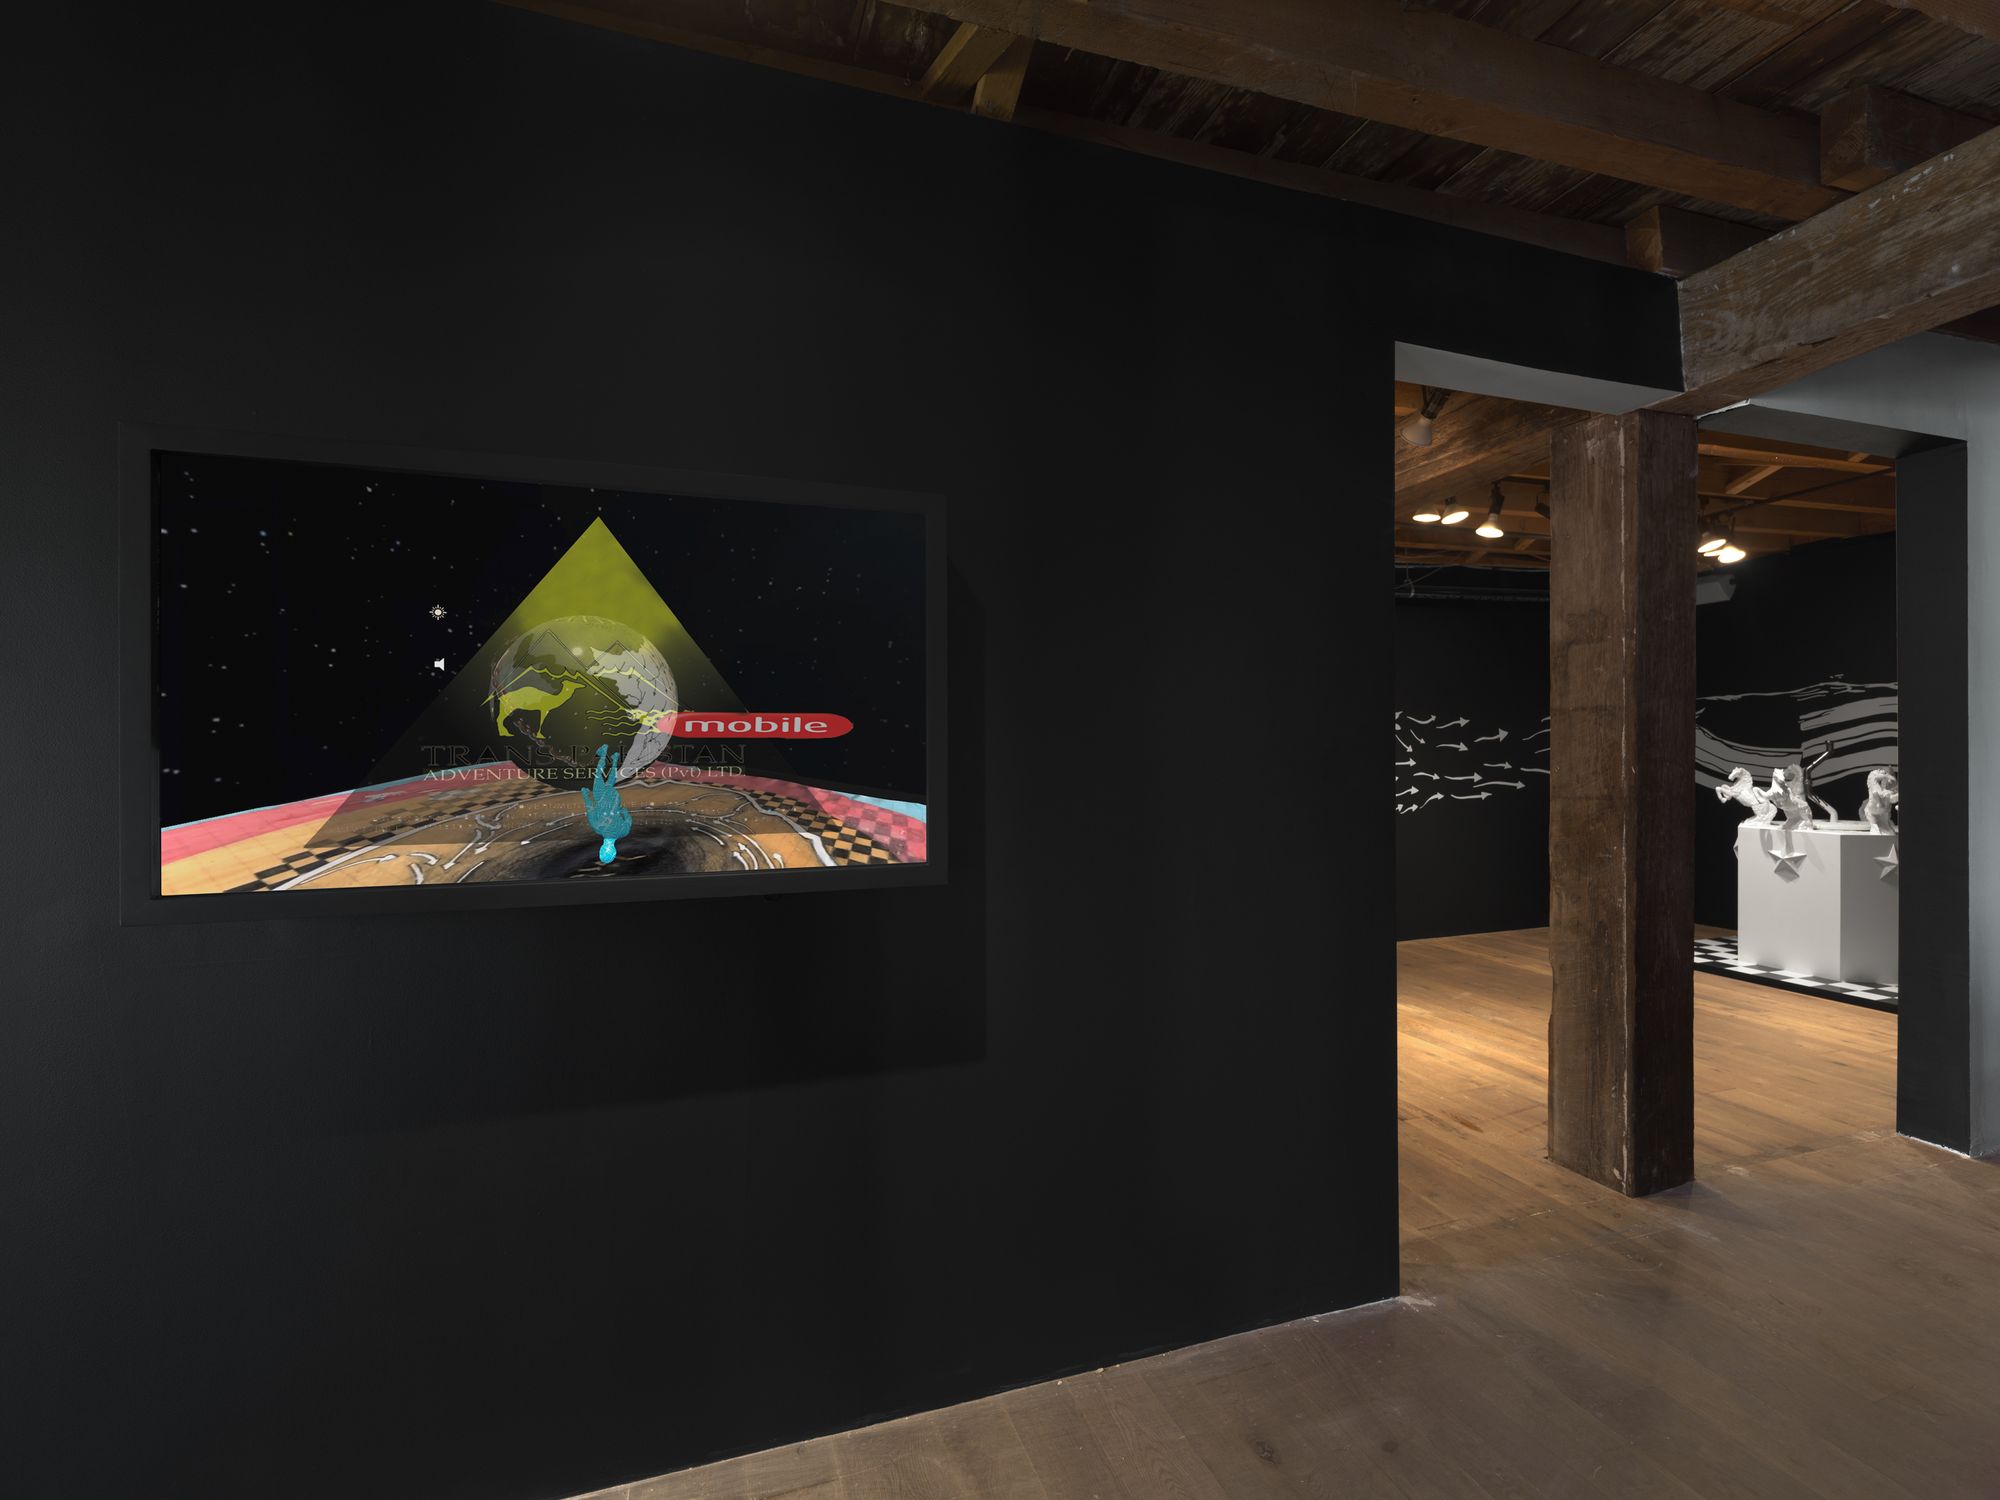 A wide angle view of the entrance to the exhibition, with a video piece hung on the wall to the left of the gallery entrance.